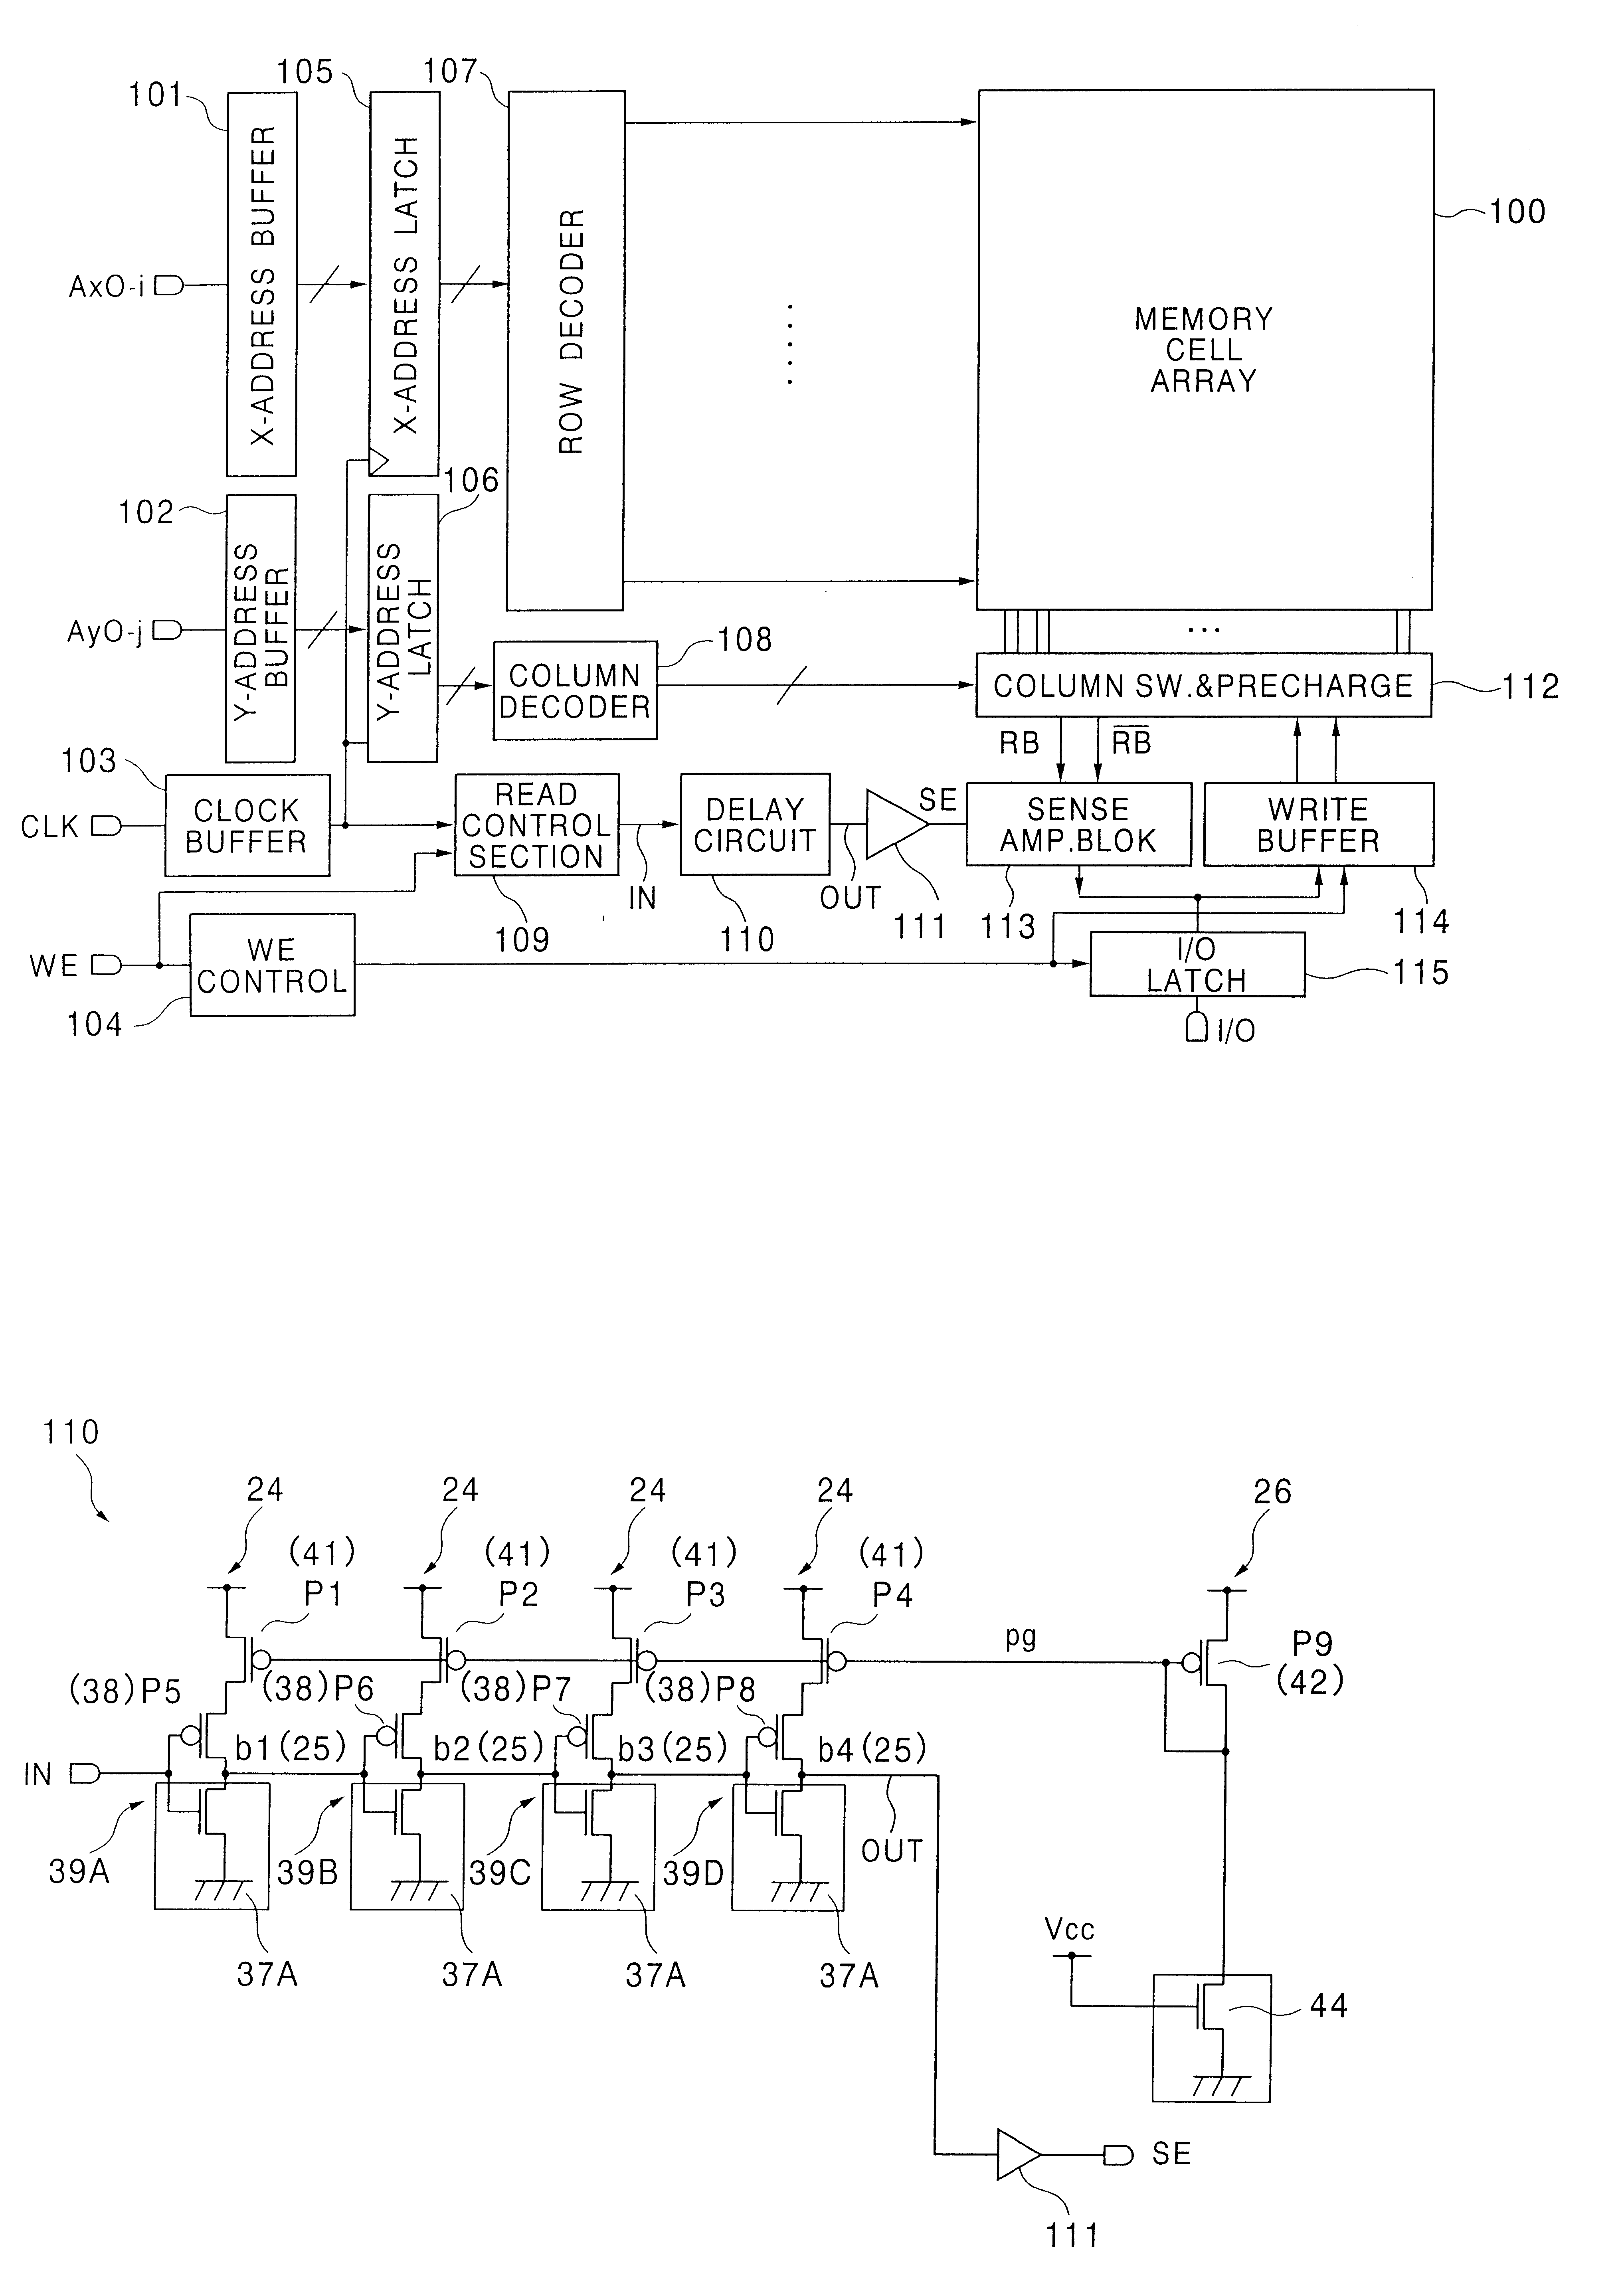 Semiconductor memory device having a delay circuit for generating a read timing